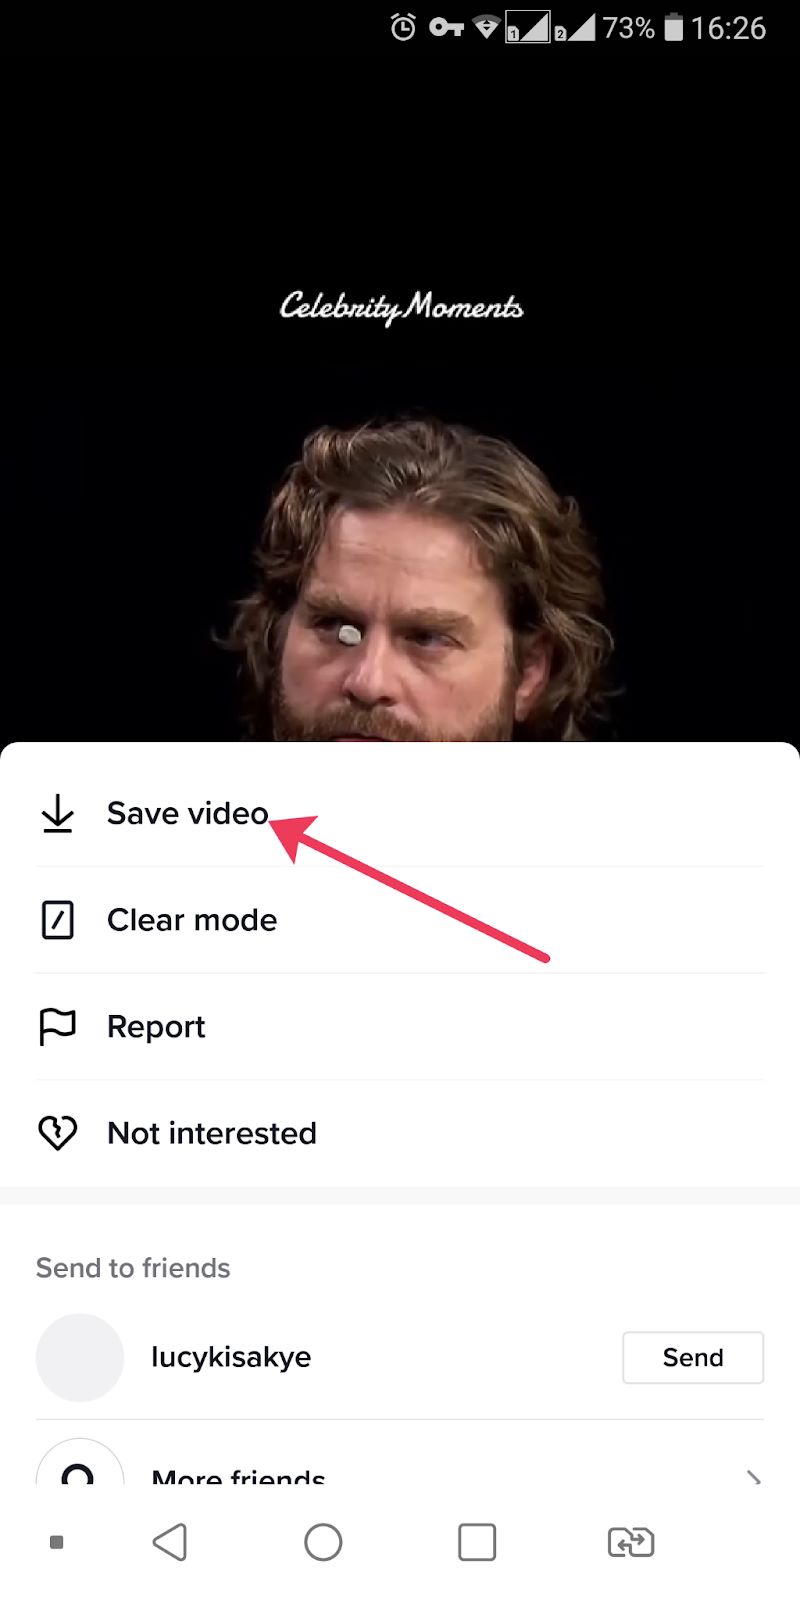 click on save video